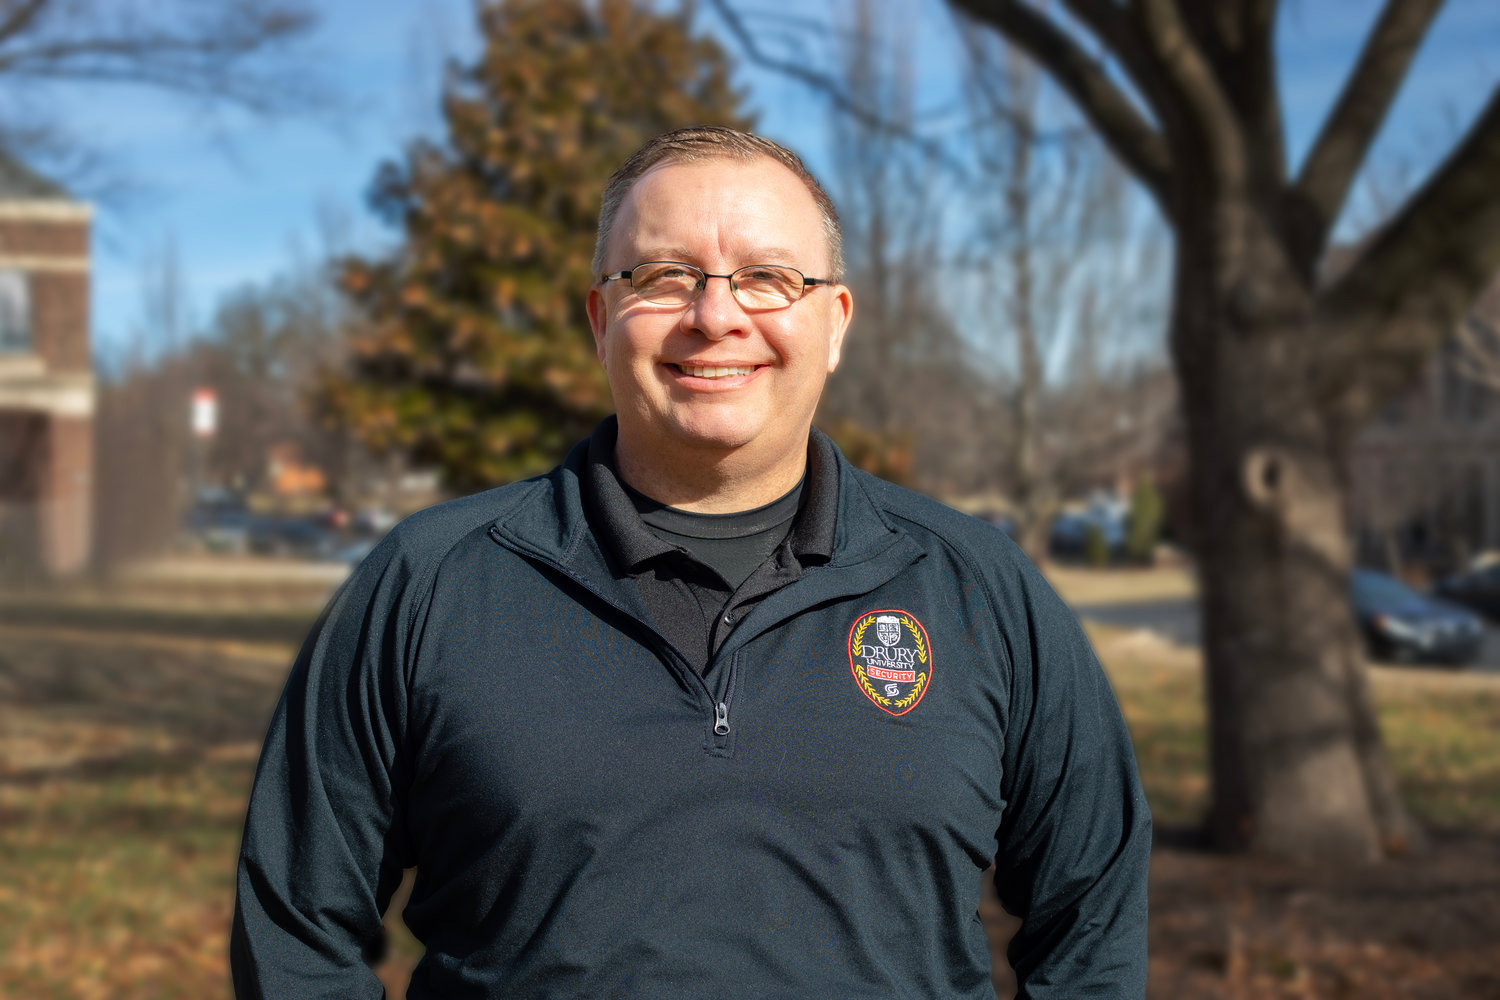 Chris Johns becomes executive director of the school's Law Enforcement Academy.